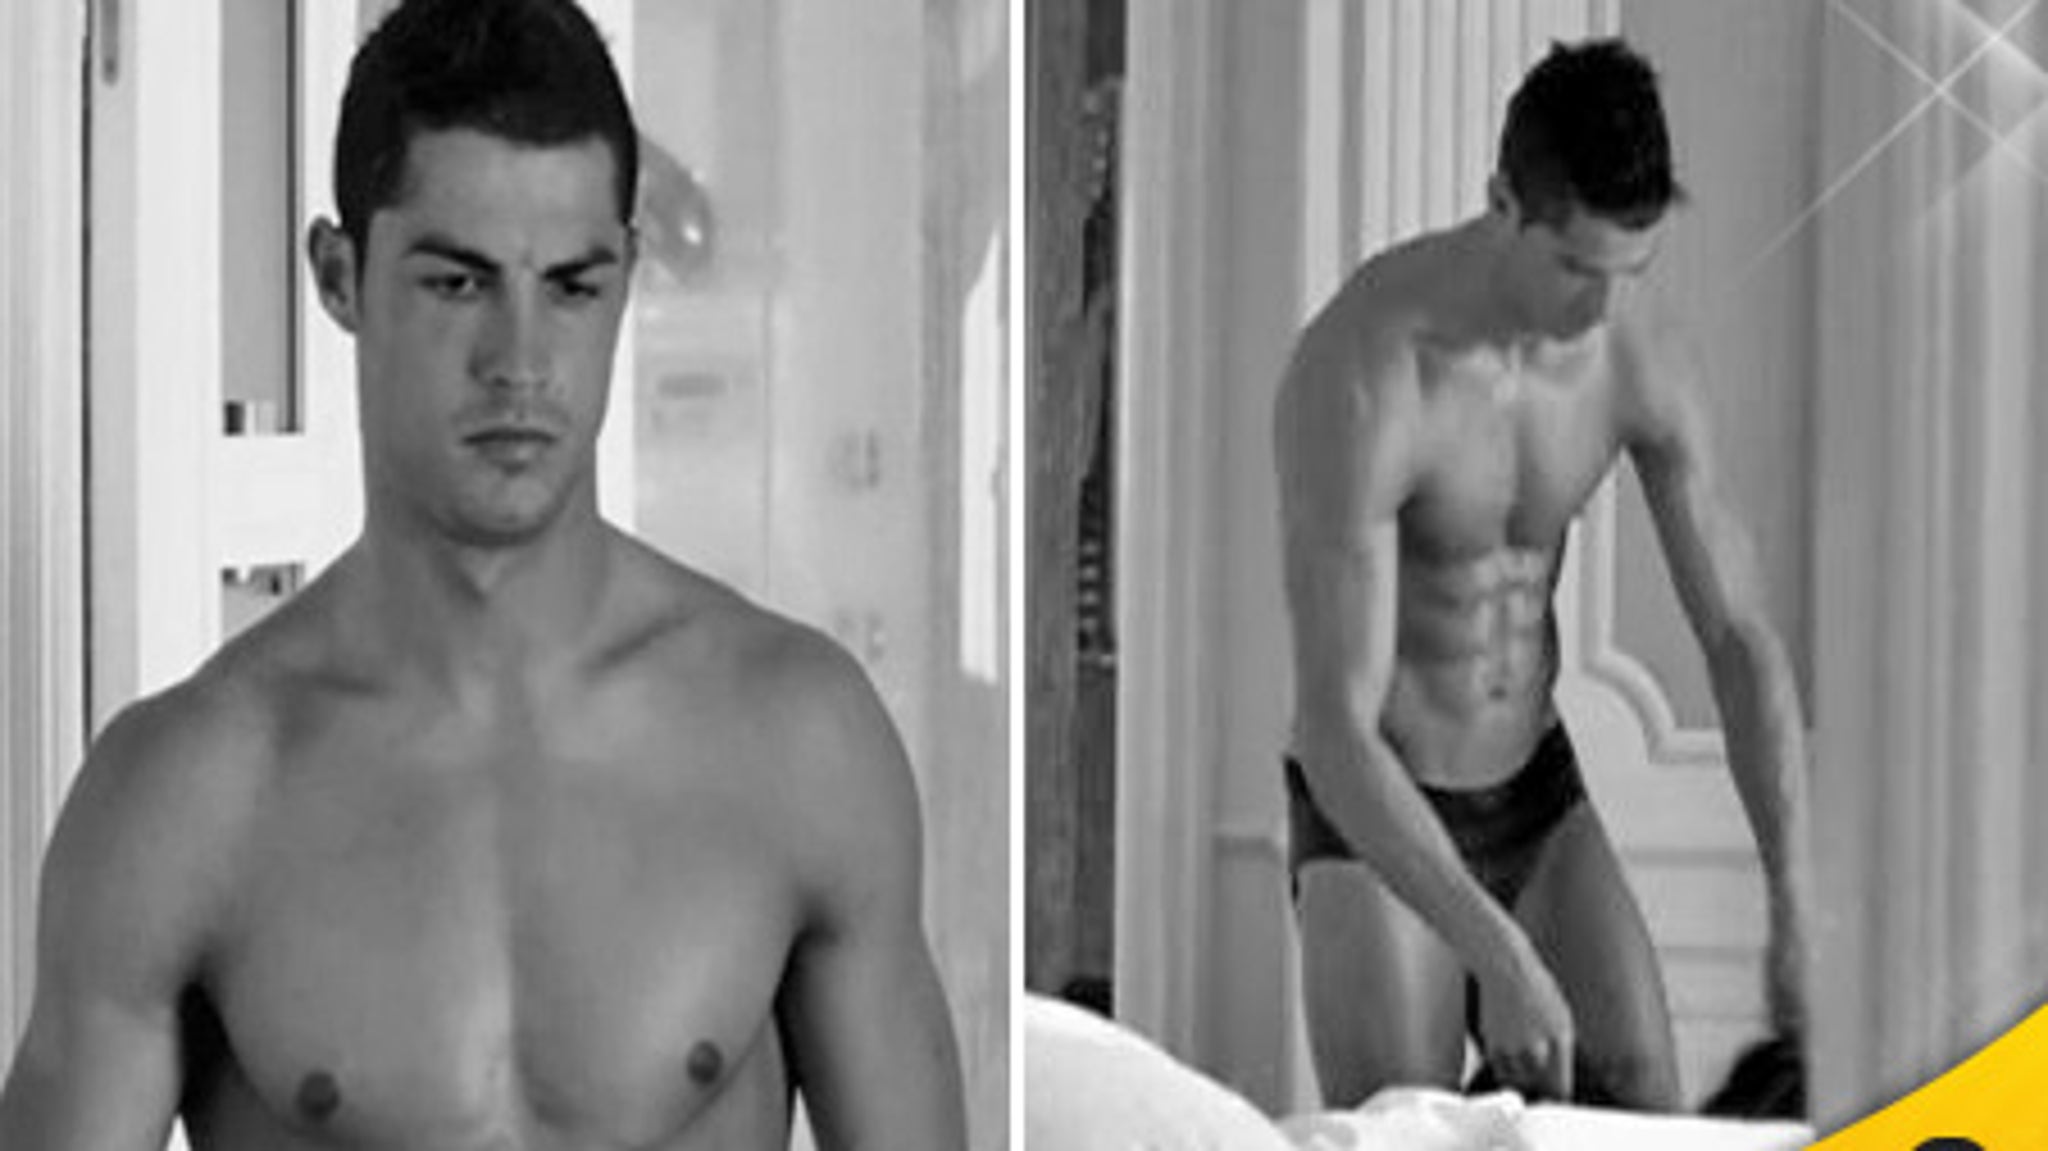 So Much Hotness! Cristiano Ronaldo Goes Shirtless for CR7 